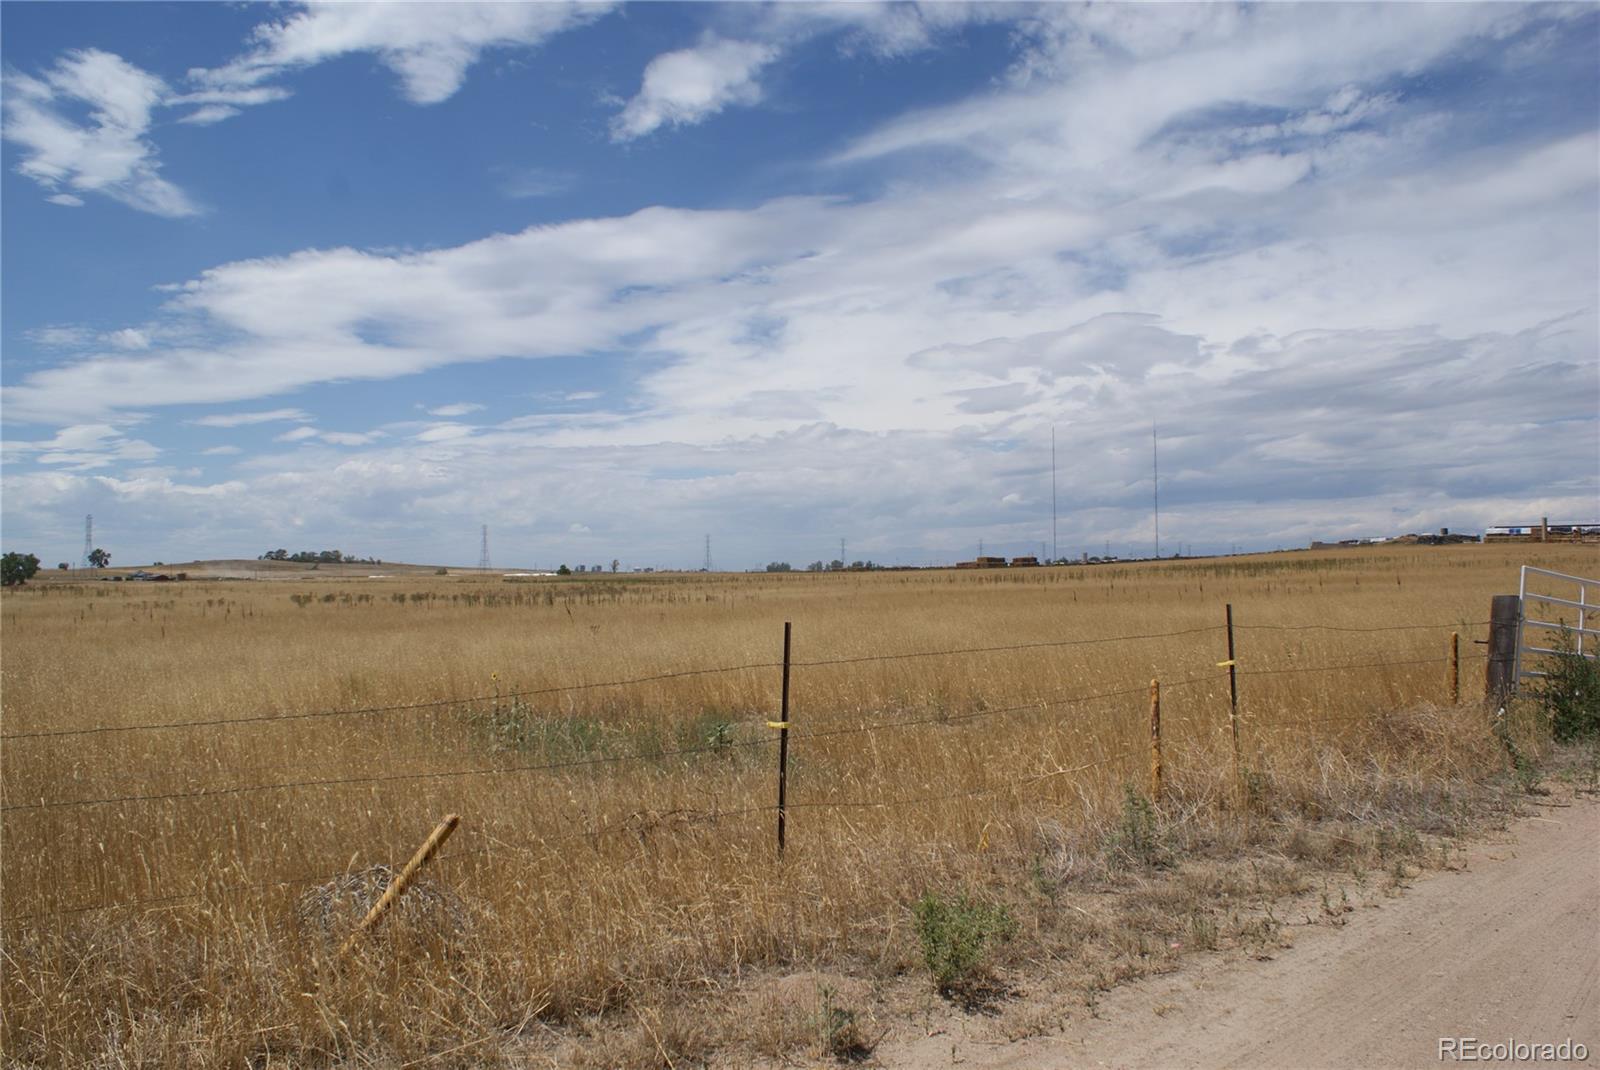  CR 21, Fort Lupton, CO